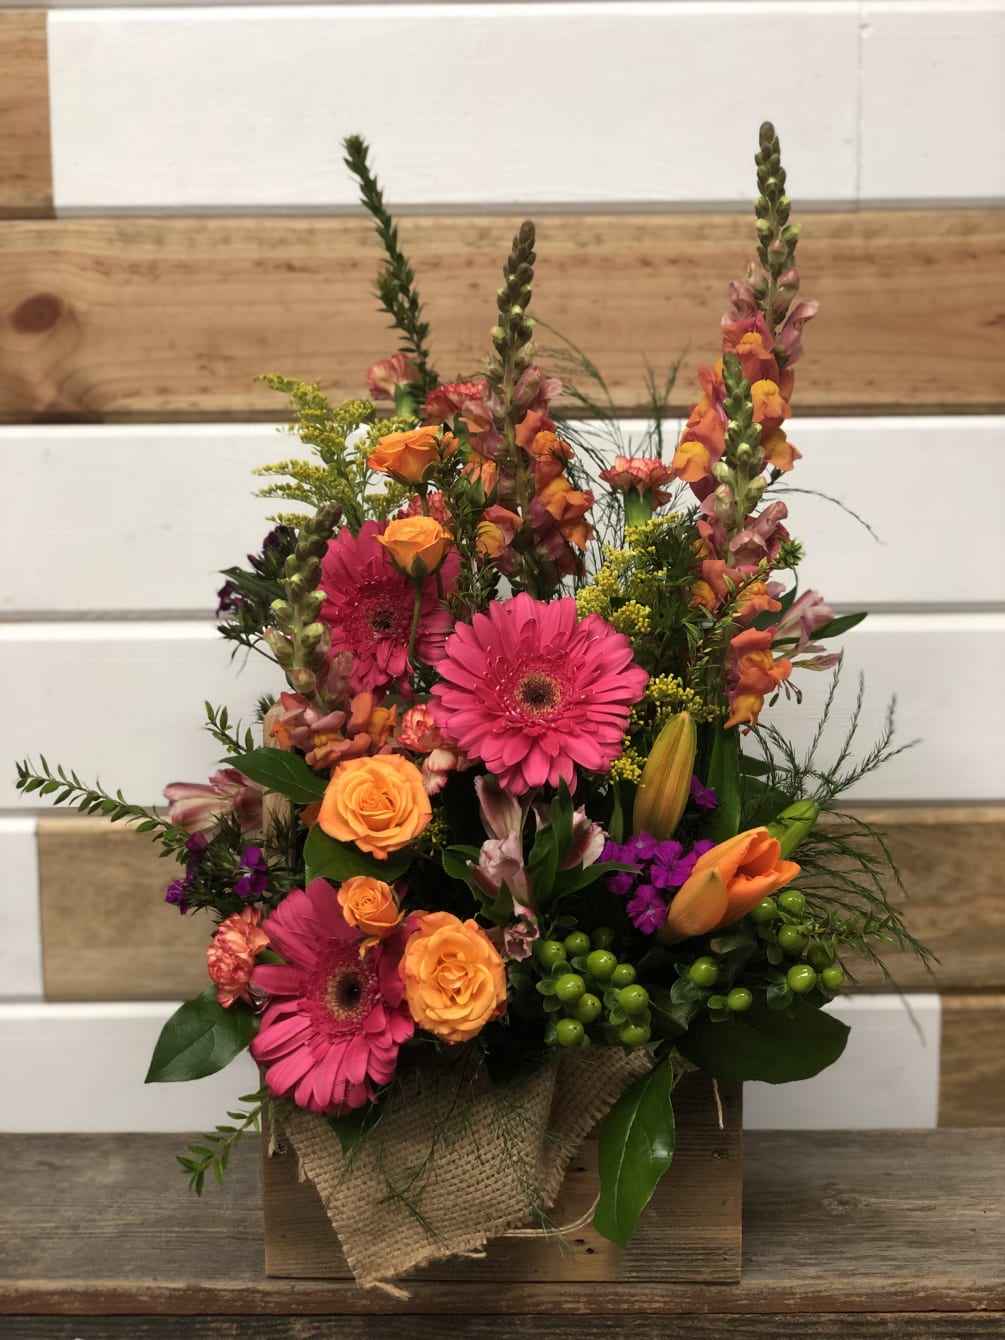 Fresh Gerbera Daisies, hypericum, spray roses and snapdragons fill this low wood